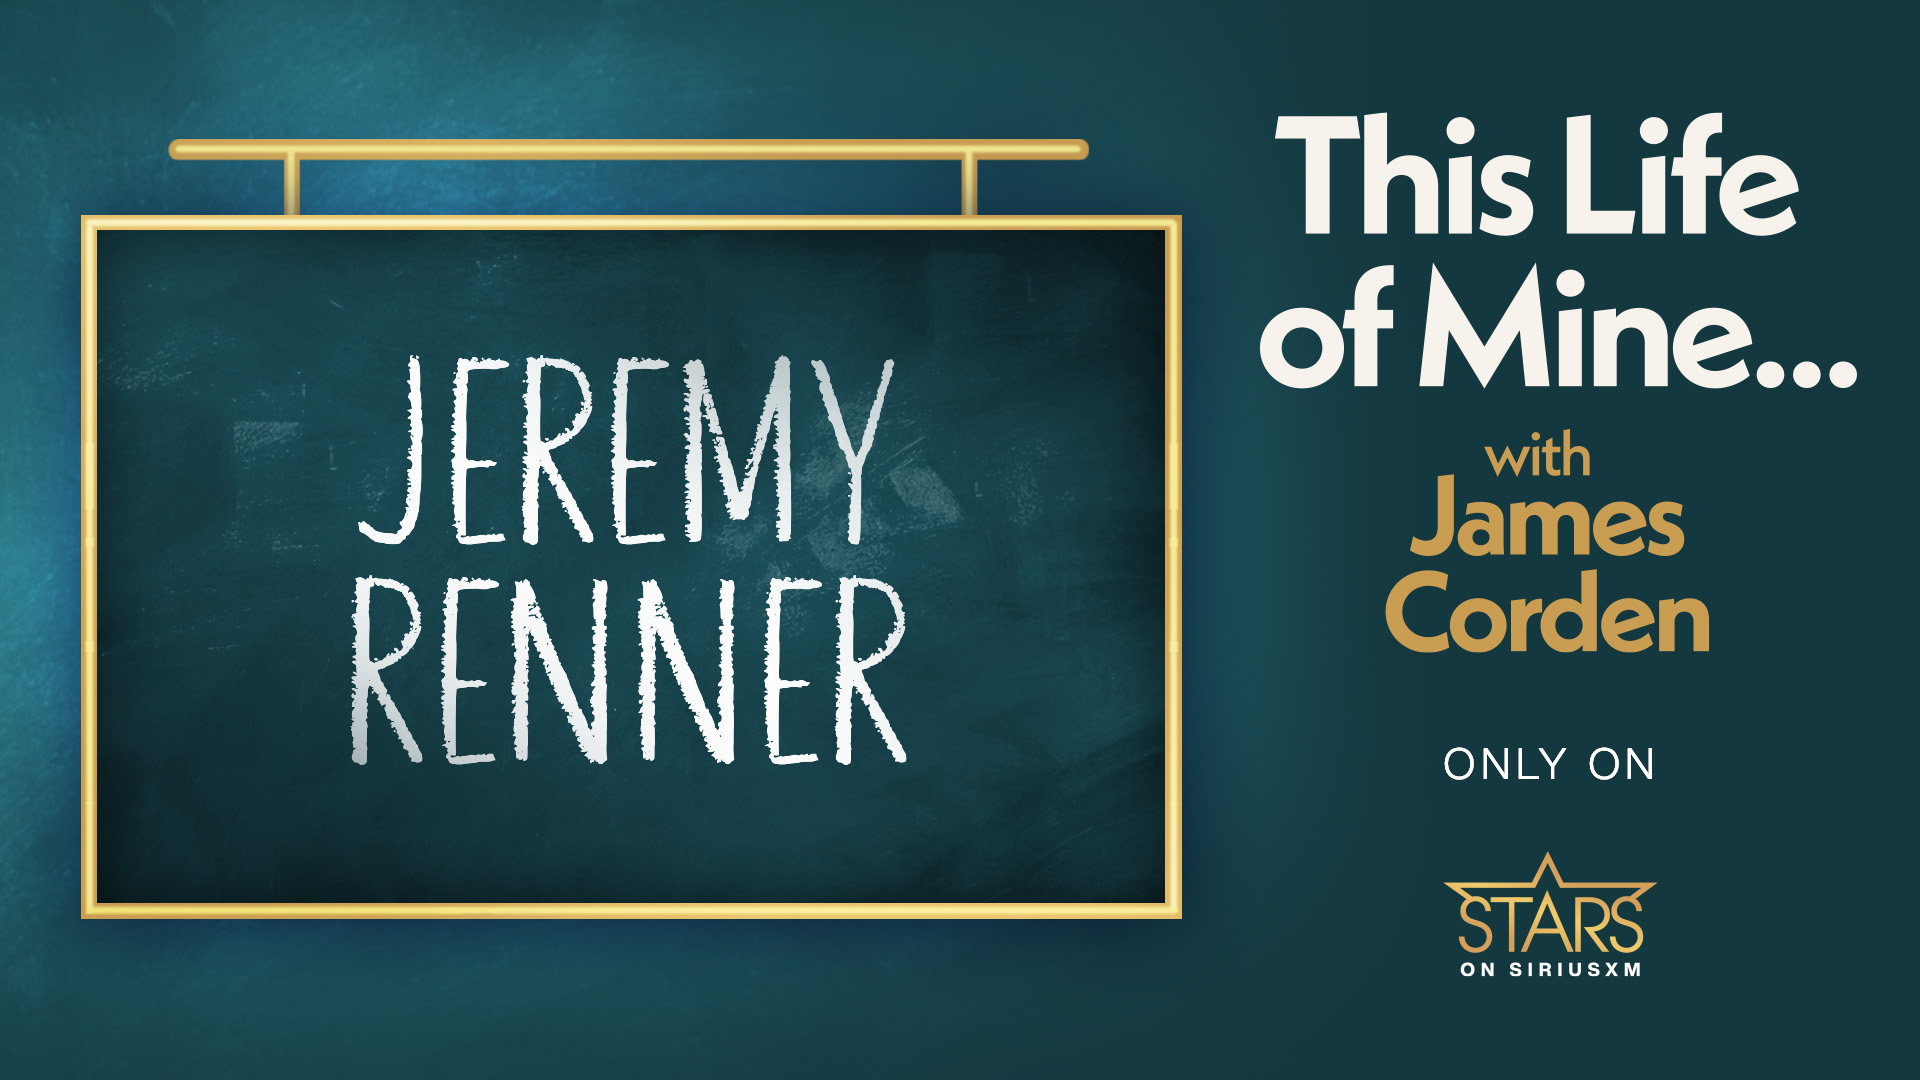 Jeremy Renner - This Life of Mine with James Corden - Only on Stars on SiriusXM (Ch. 109)